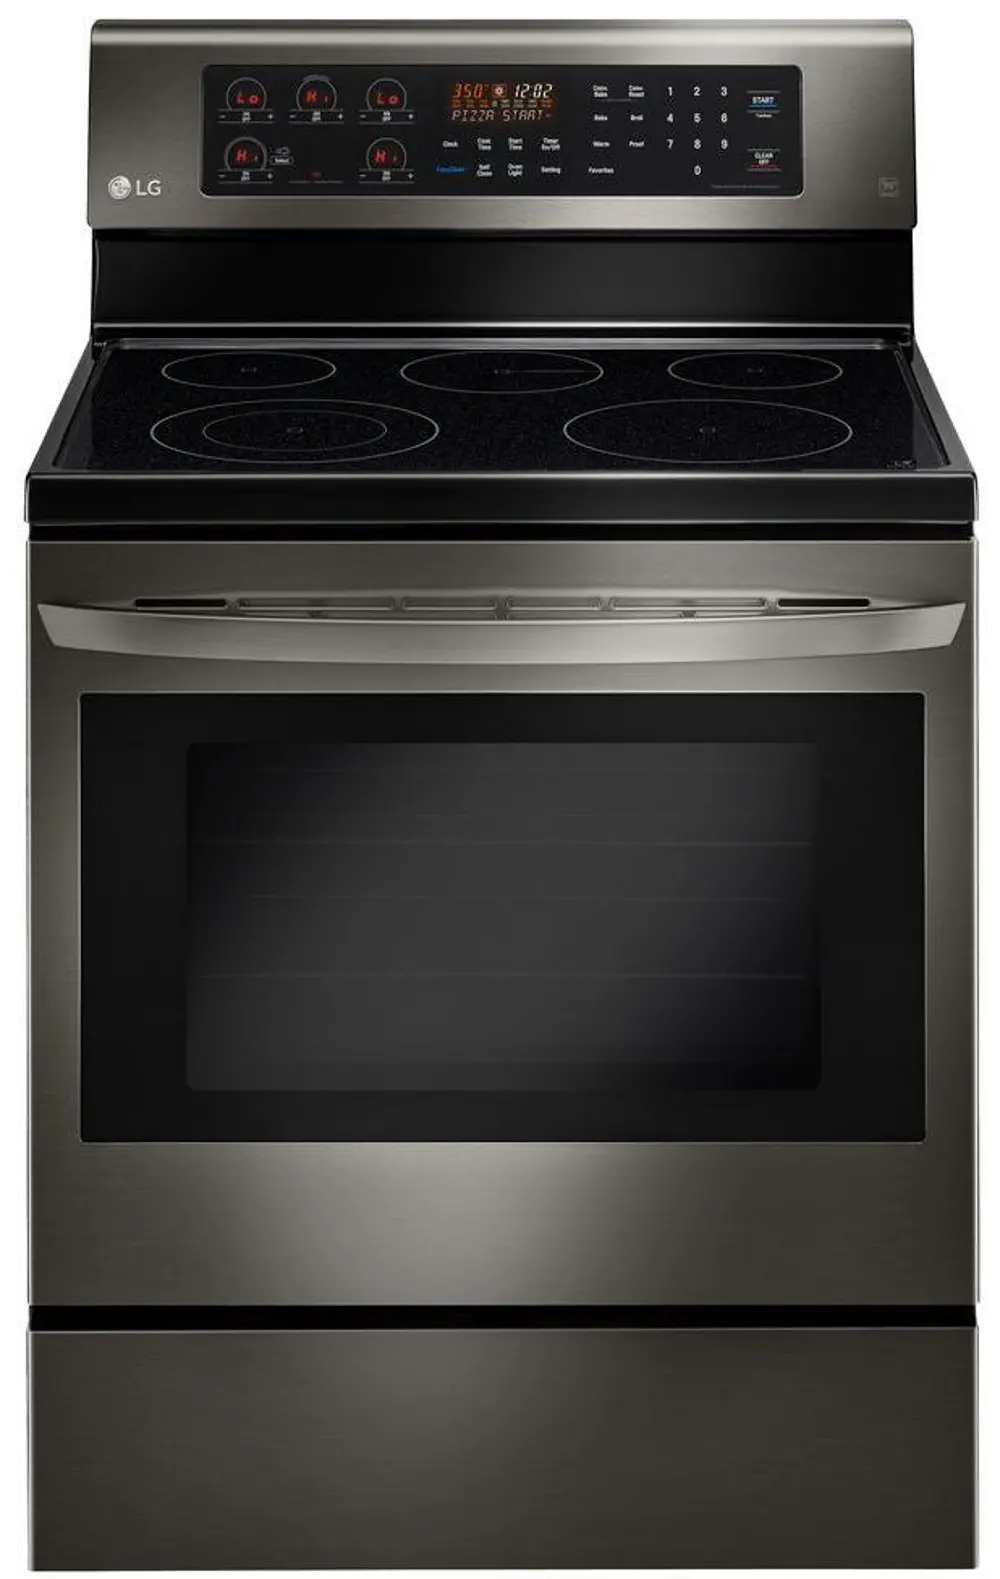 LRE3083BD LG 30 Inch 6.3 cu. ft. Electric Range - Black Stainless Steel-1